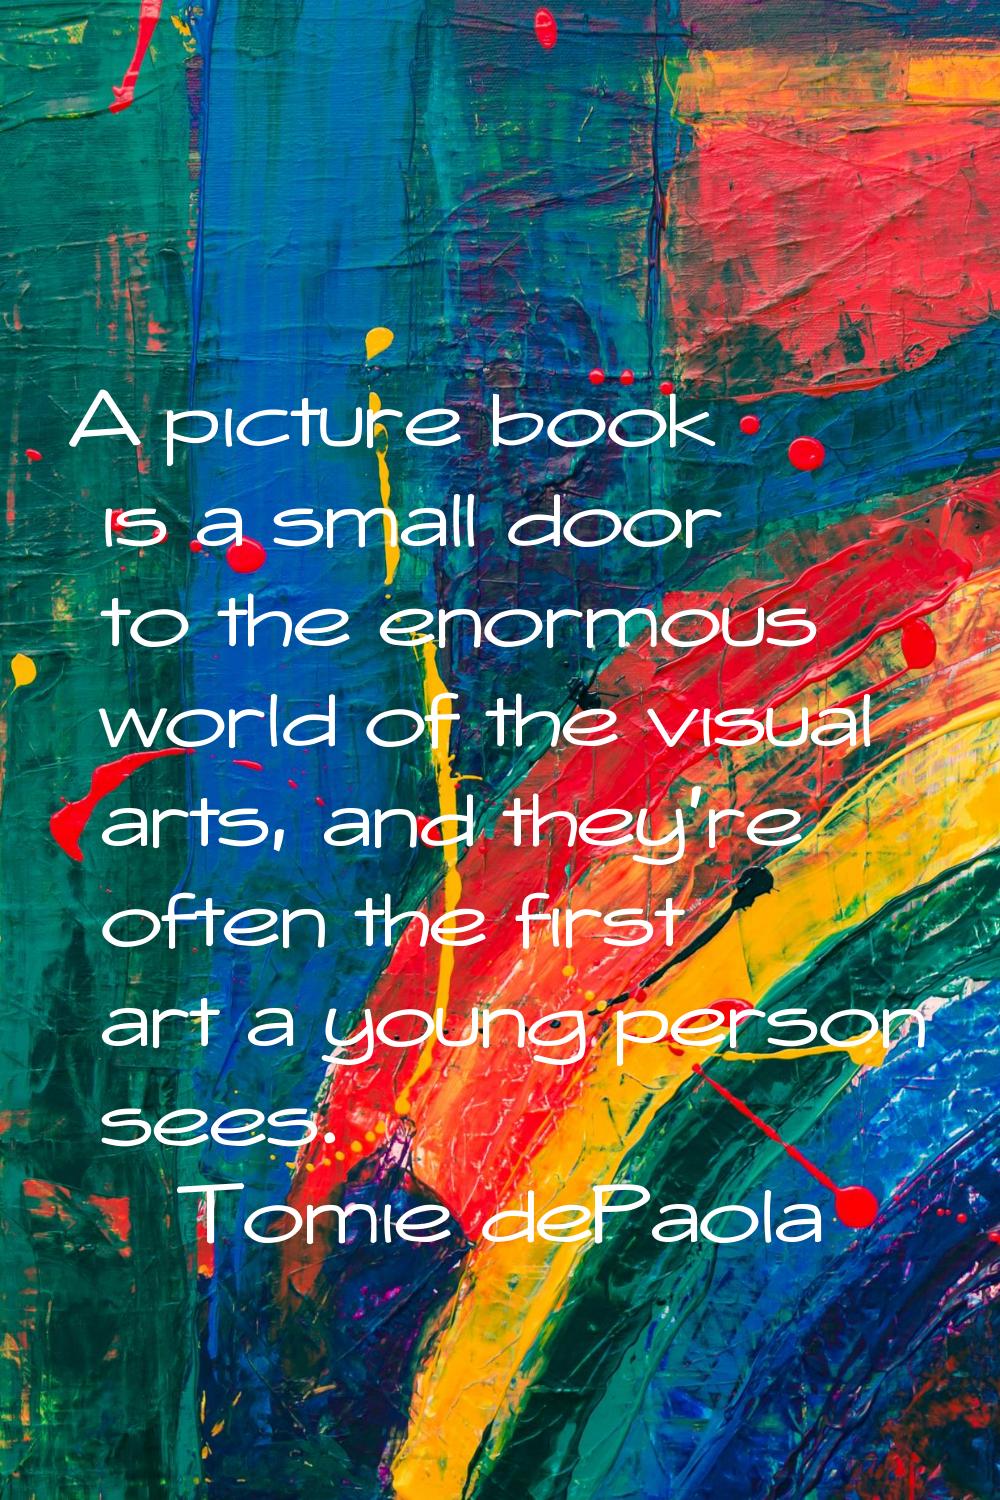 A picture book is a small door to the enormous world of the visual arts, and they're often the firs